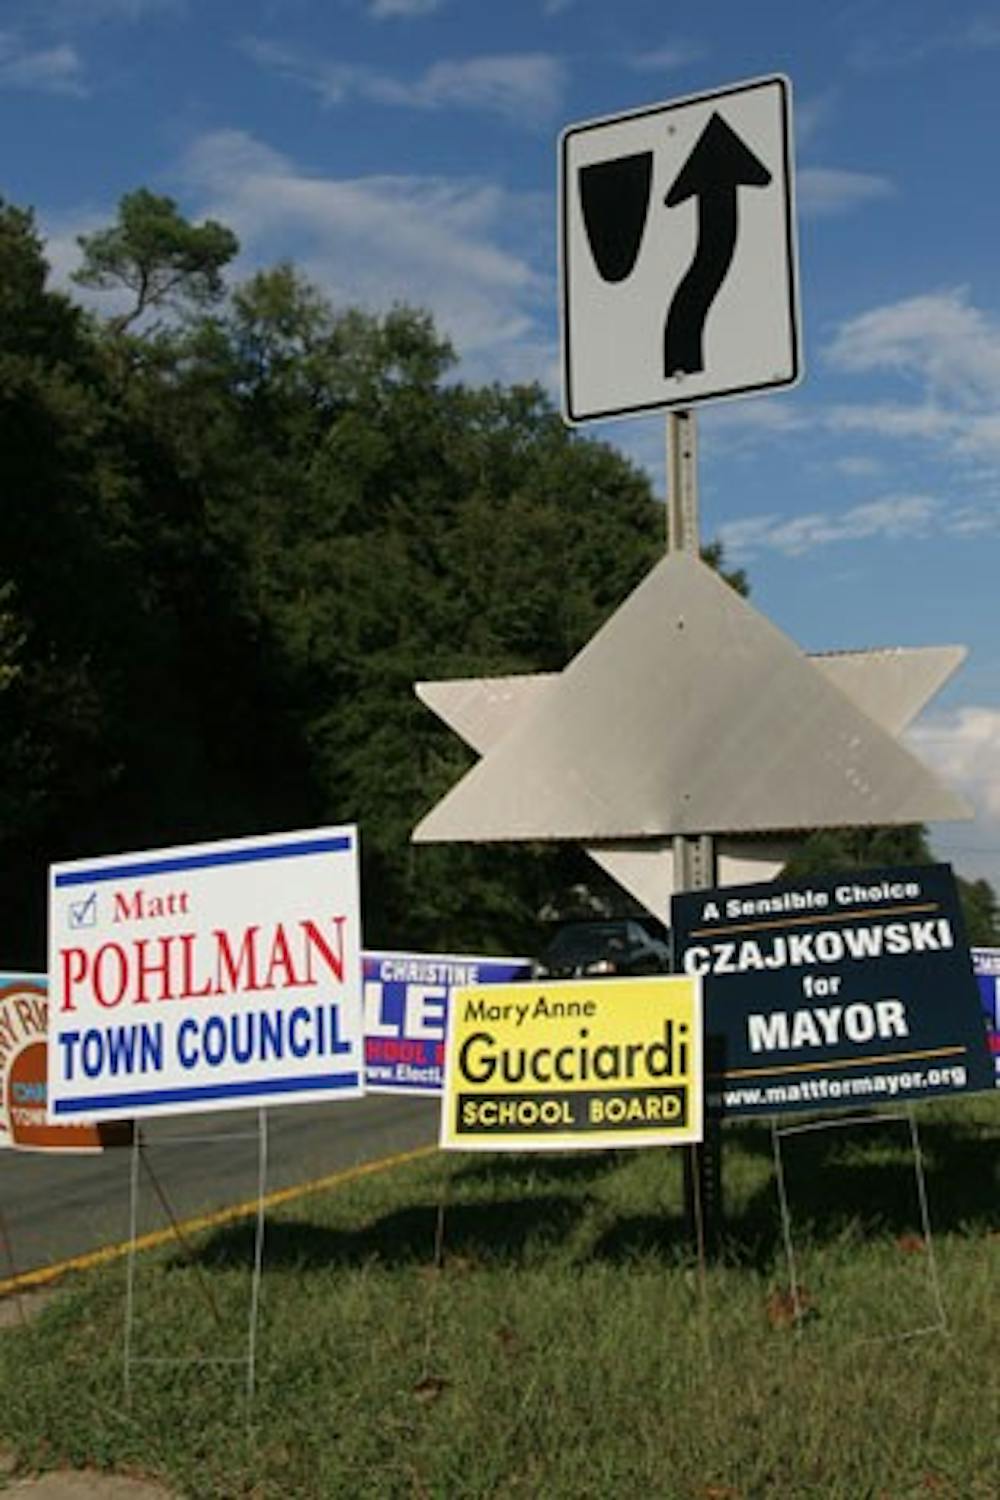 Mayoral candidate and other public office signs are scattered around Chapel Hill and Carrboro. DTH/Kim Martiniuk